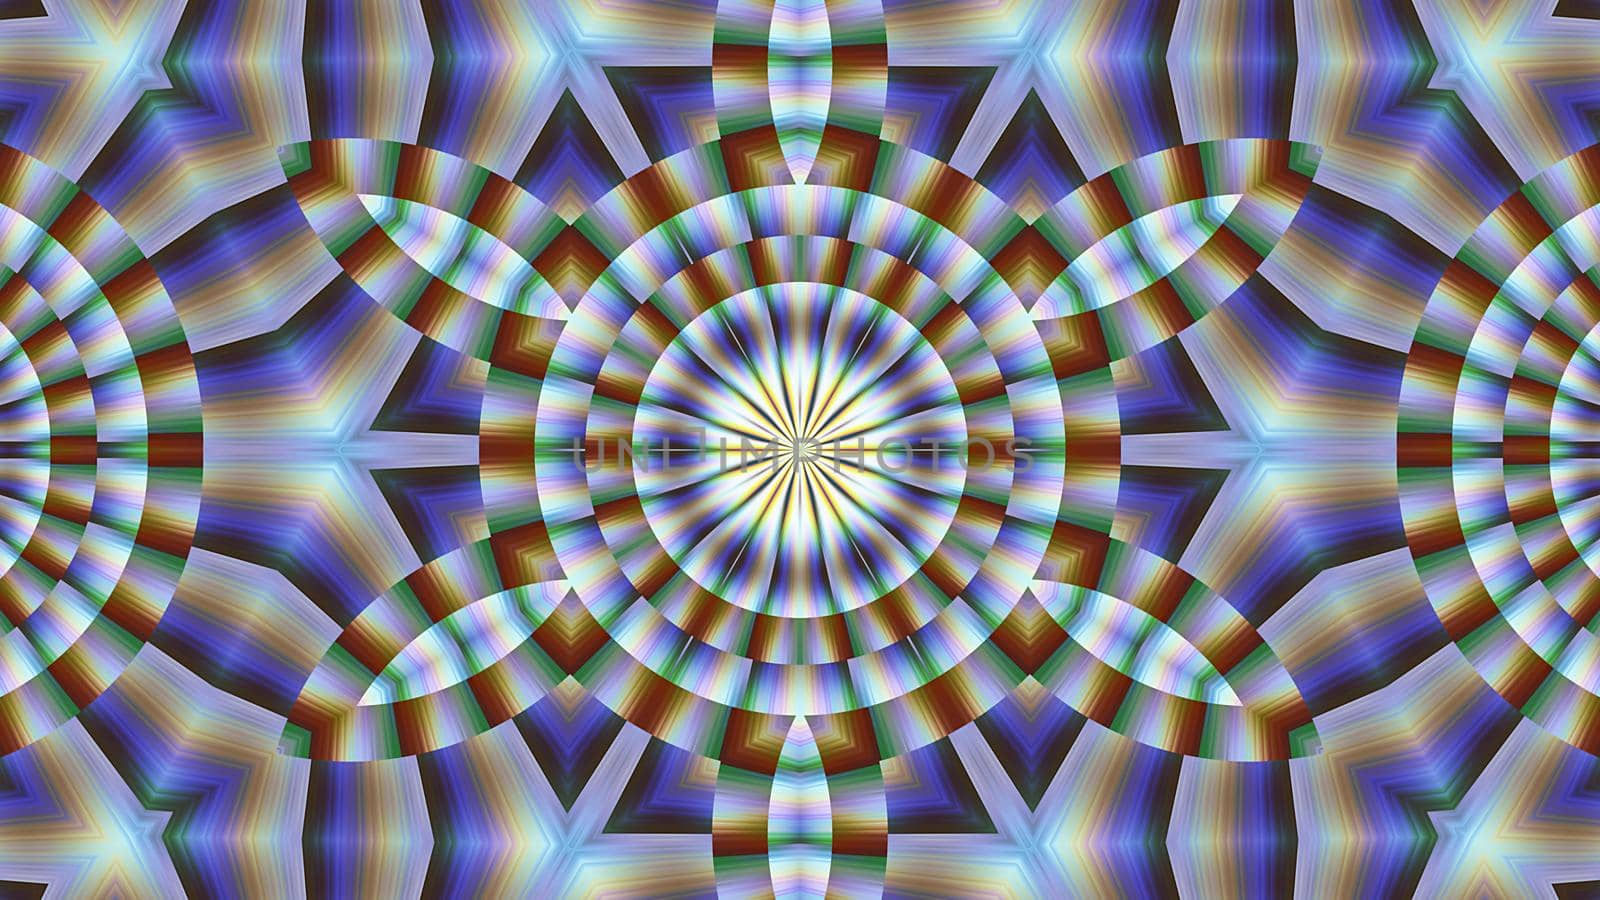 Abstract textured multicolored symmetrical kaleidoscope background by Vvicca